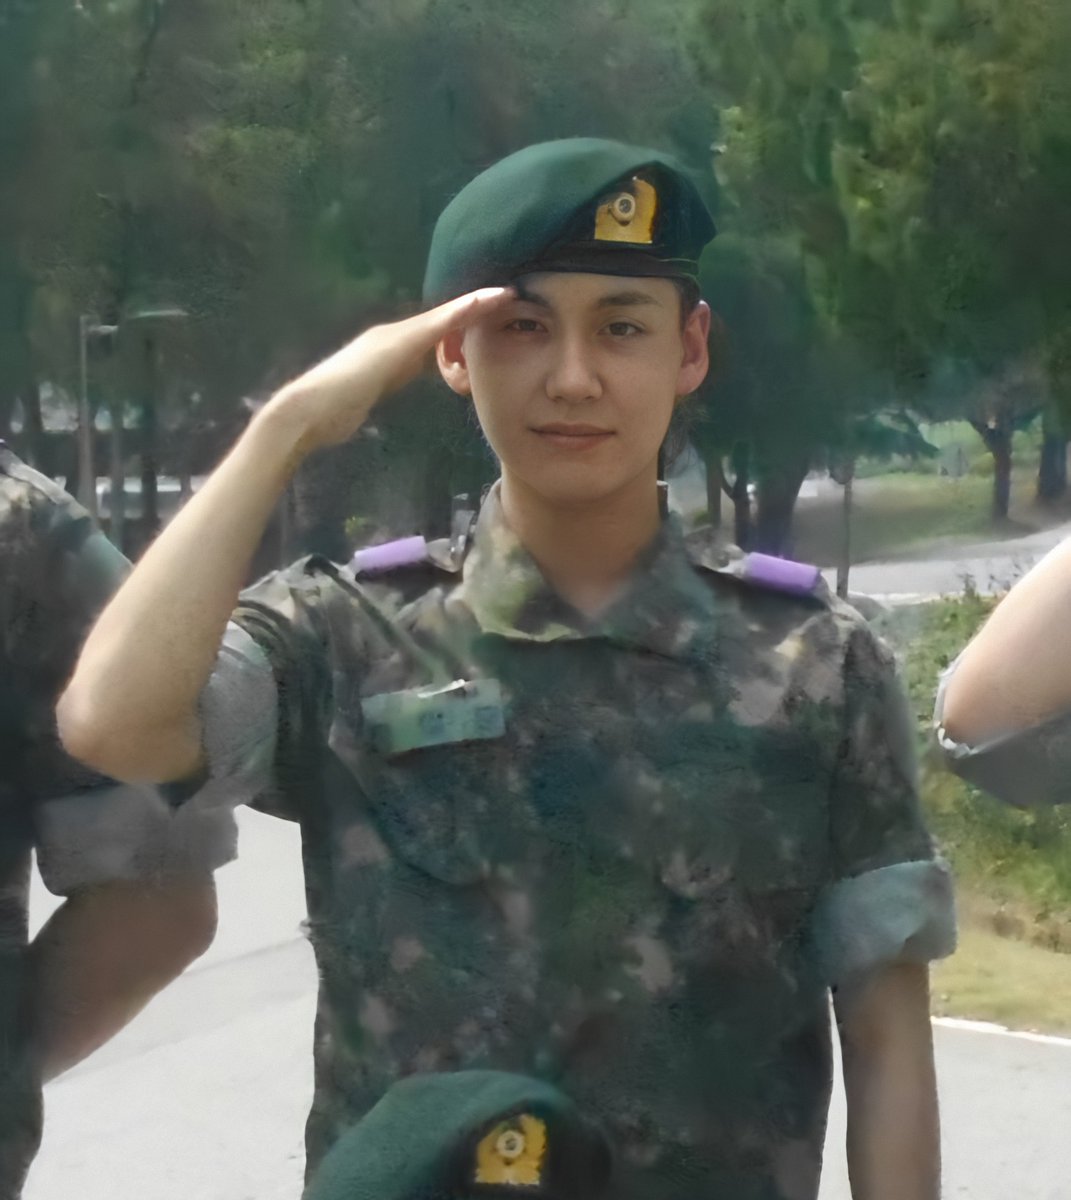 D-628We have another update of ilhoon now wearing his full uniform. Stay healthy uri irunie. 